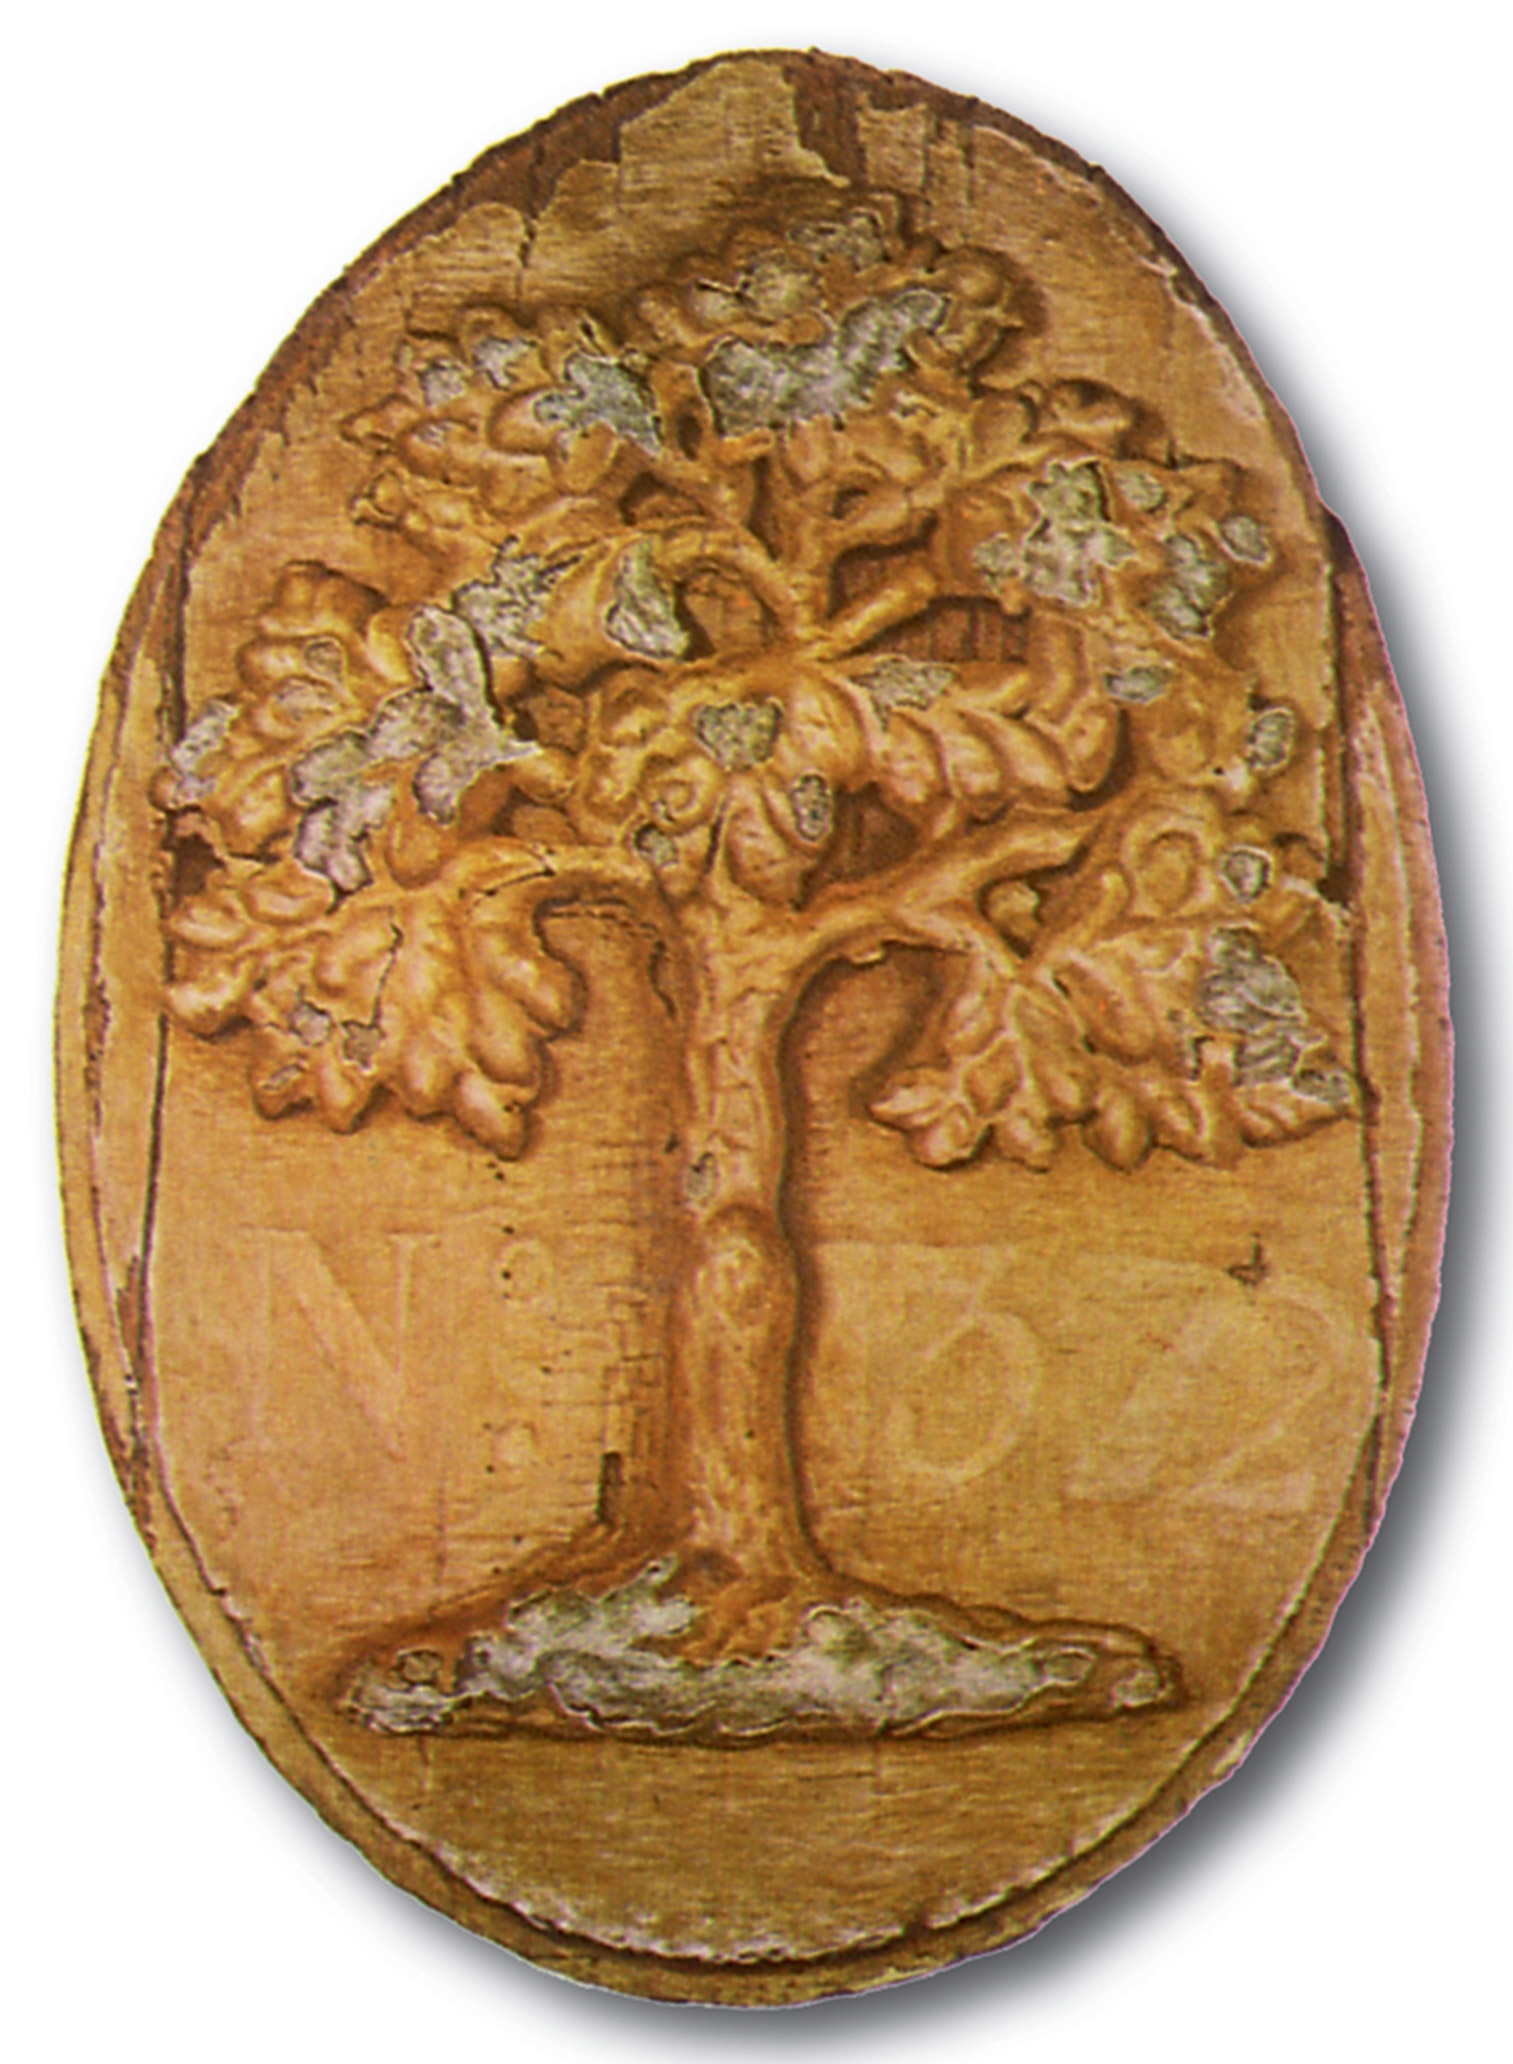 A photograph of the Green Tree fire mark which was originally issued by the Mutual Assurance Company of Philadelphia. 